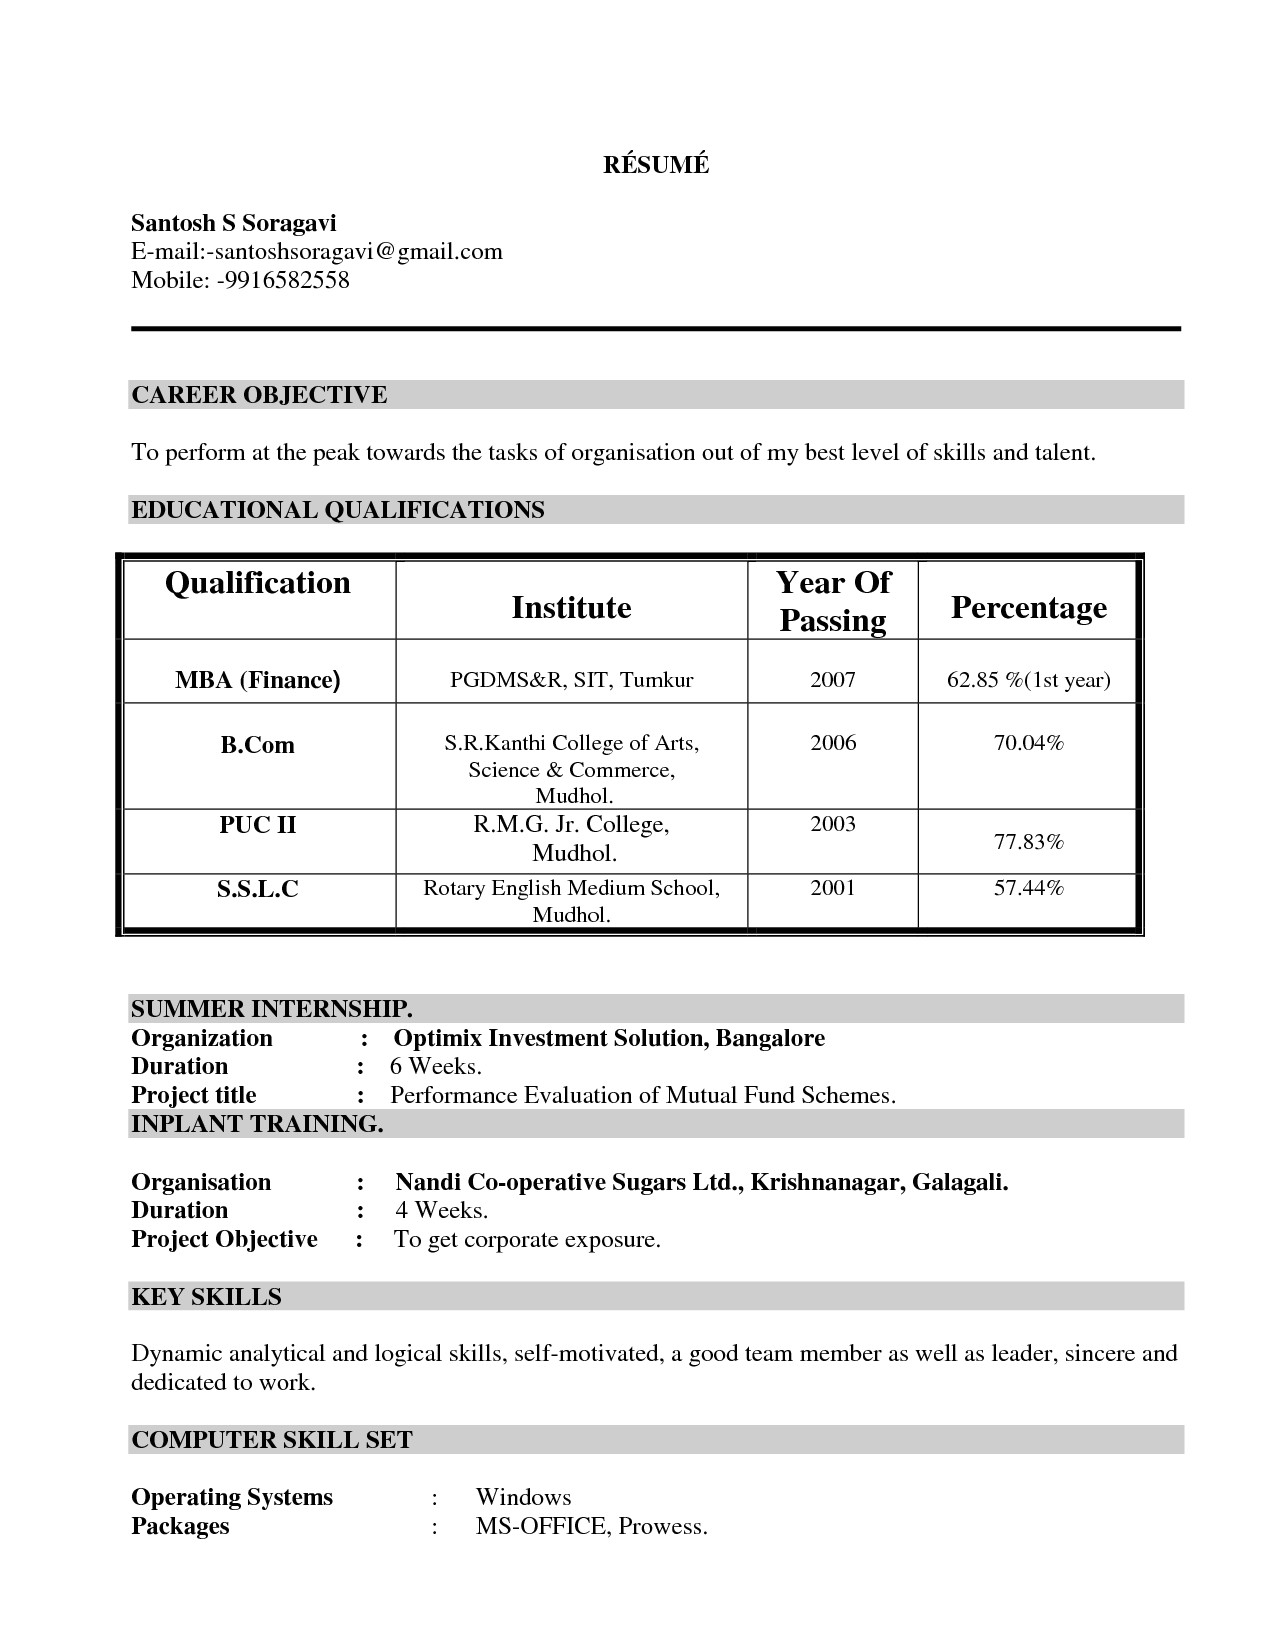 mba finance experience resume format